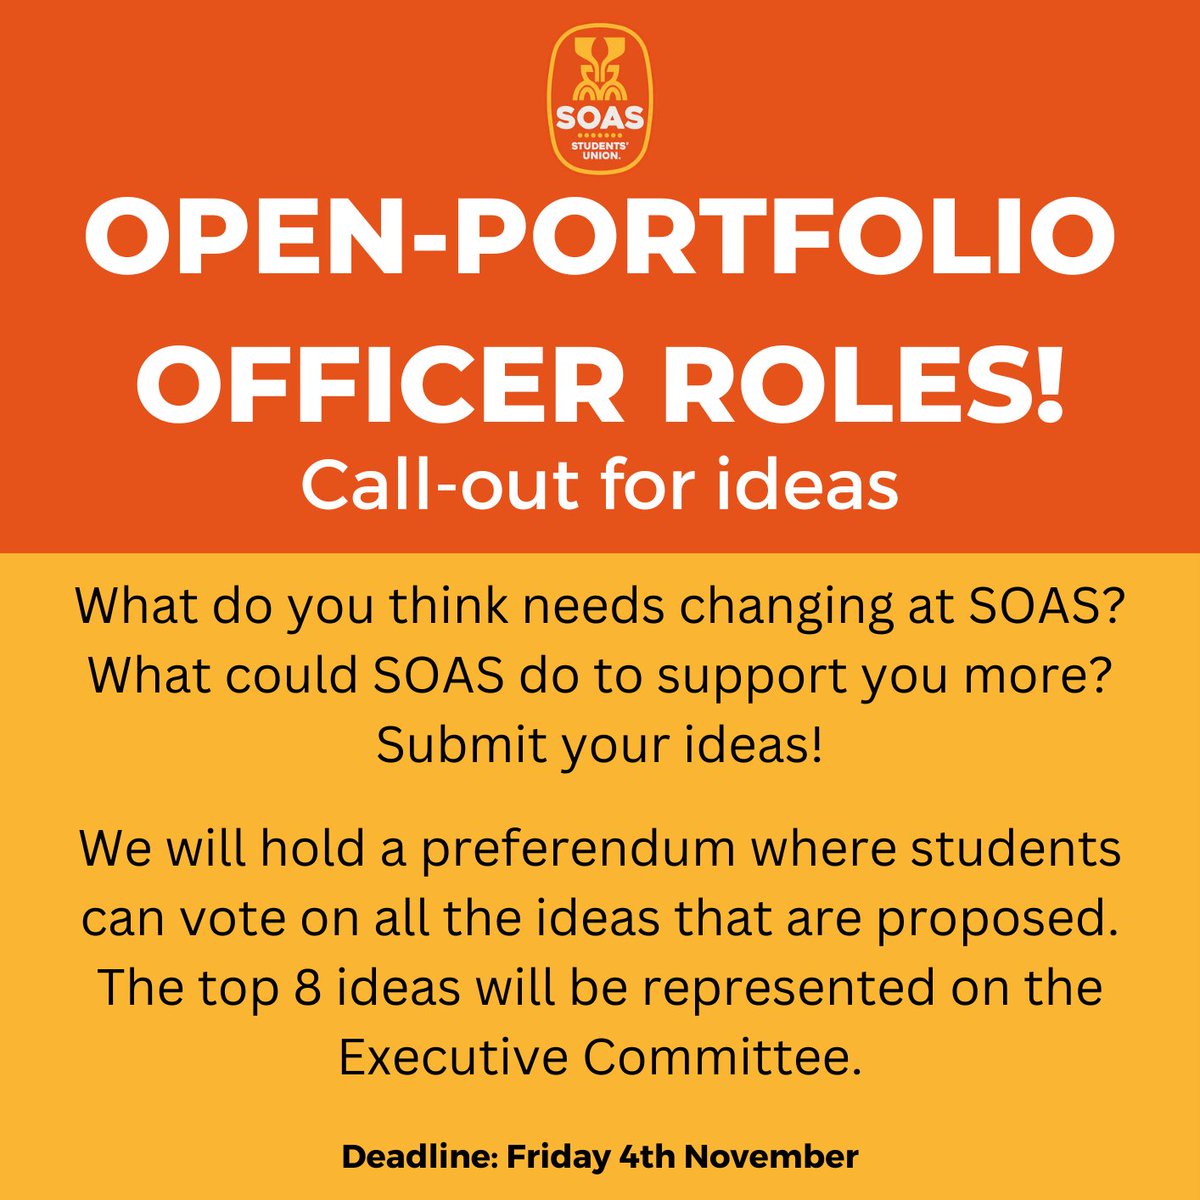 We want as many students as possible to submit ideas about what they think is important and needs changing at SOAS. These ideas could relate to any aspect of student life. Submit your ideas using the form linked below: forms.office.com/r/qm2qthvJnK